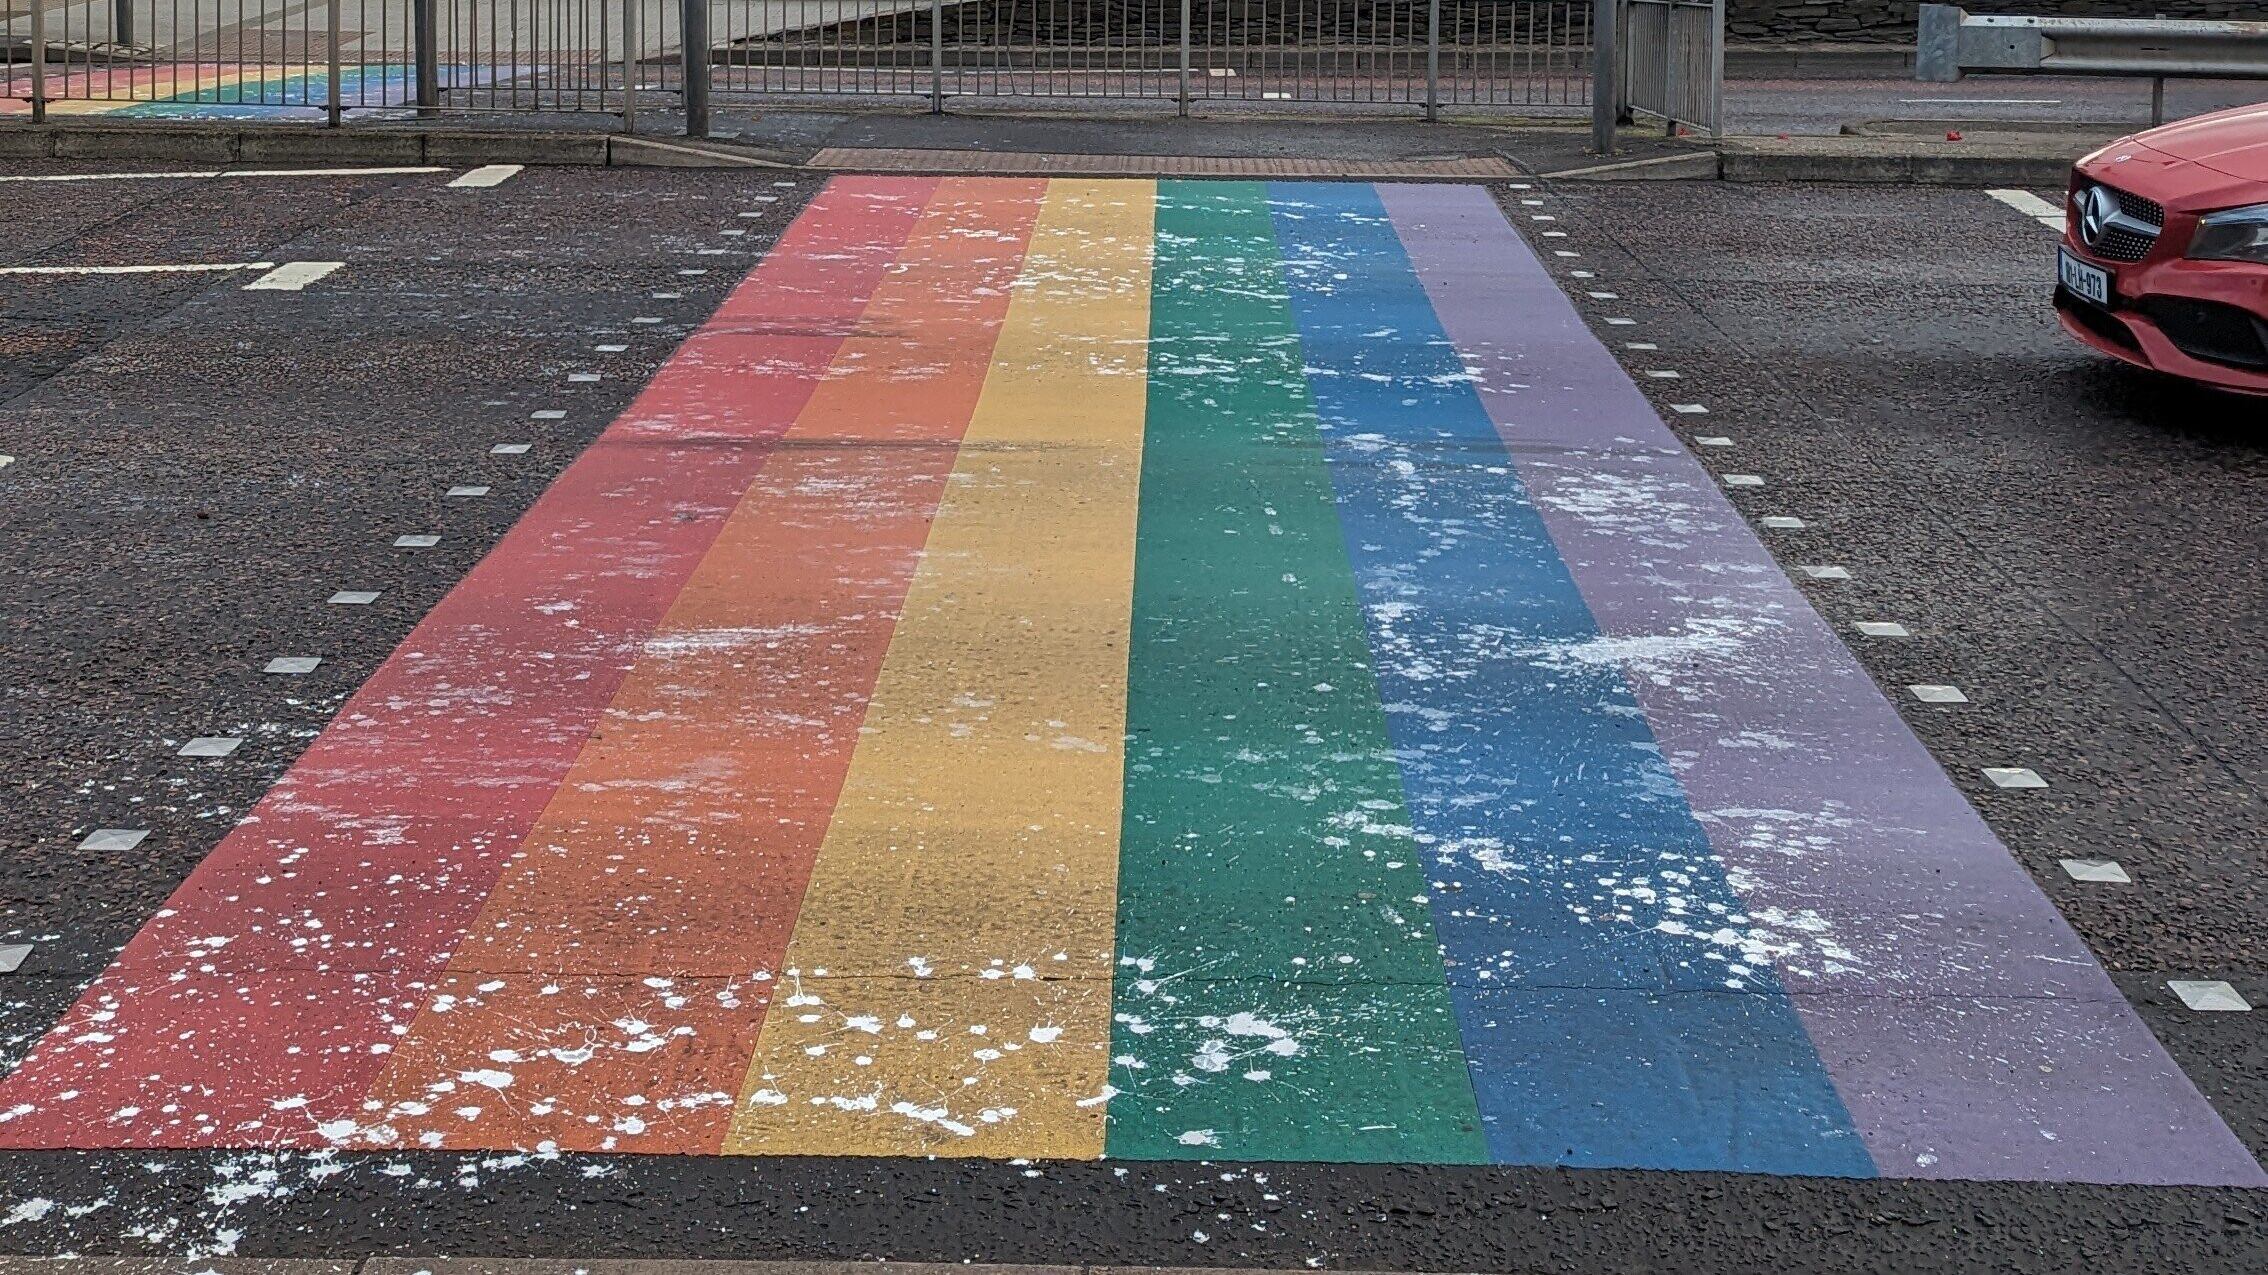 White paint was daubed on Derry's rainbow crossing in what police have described as a hate crime. 